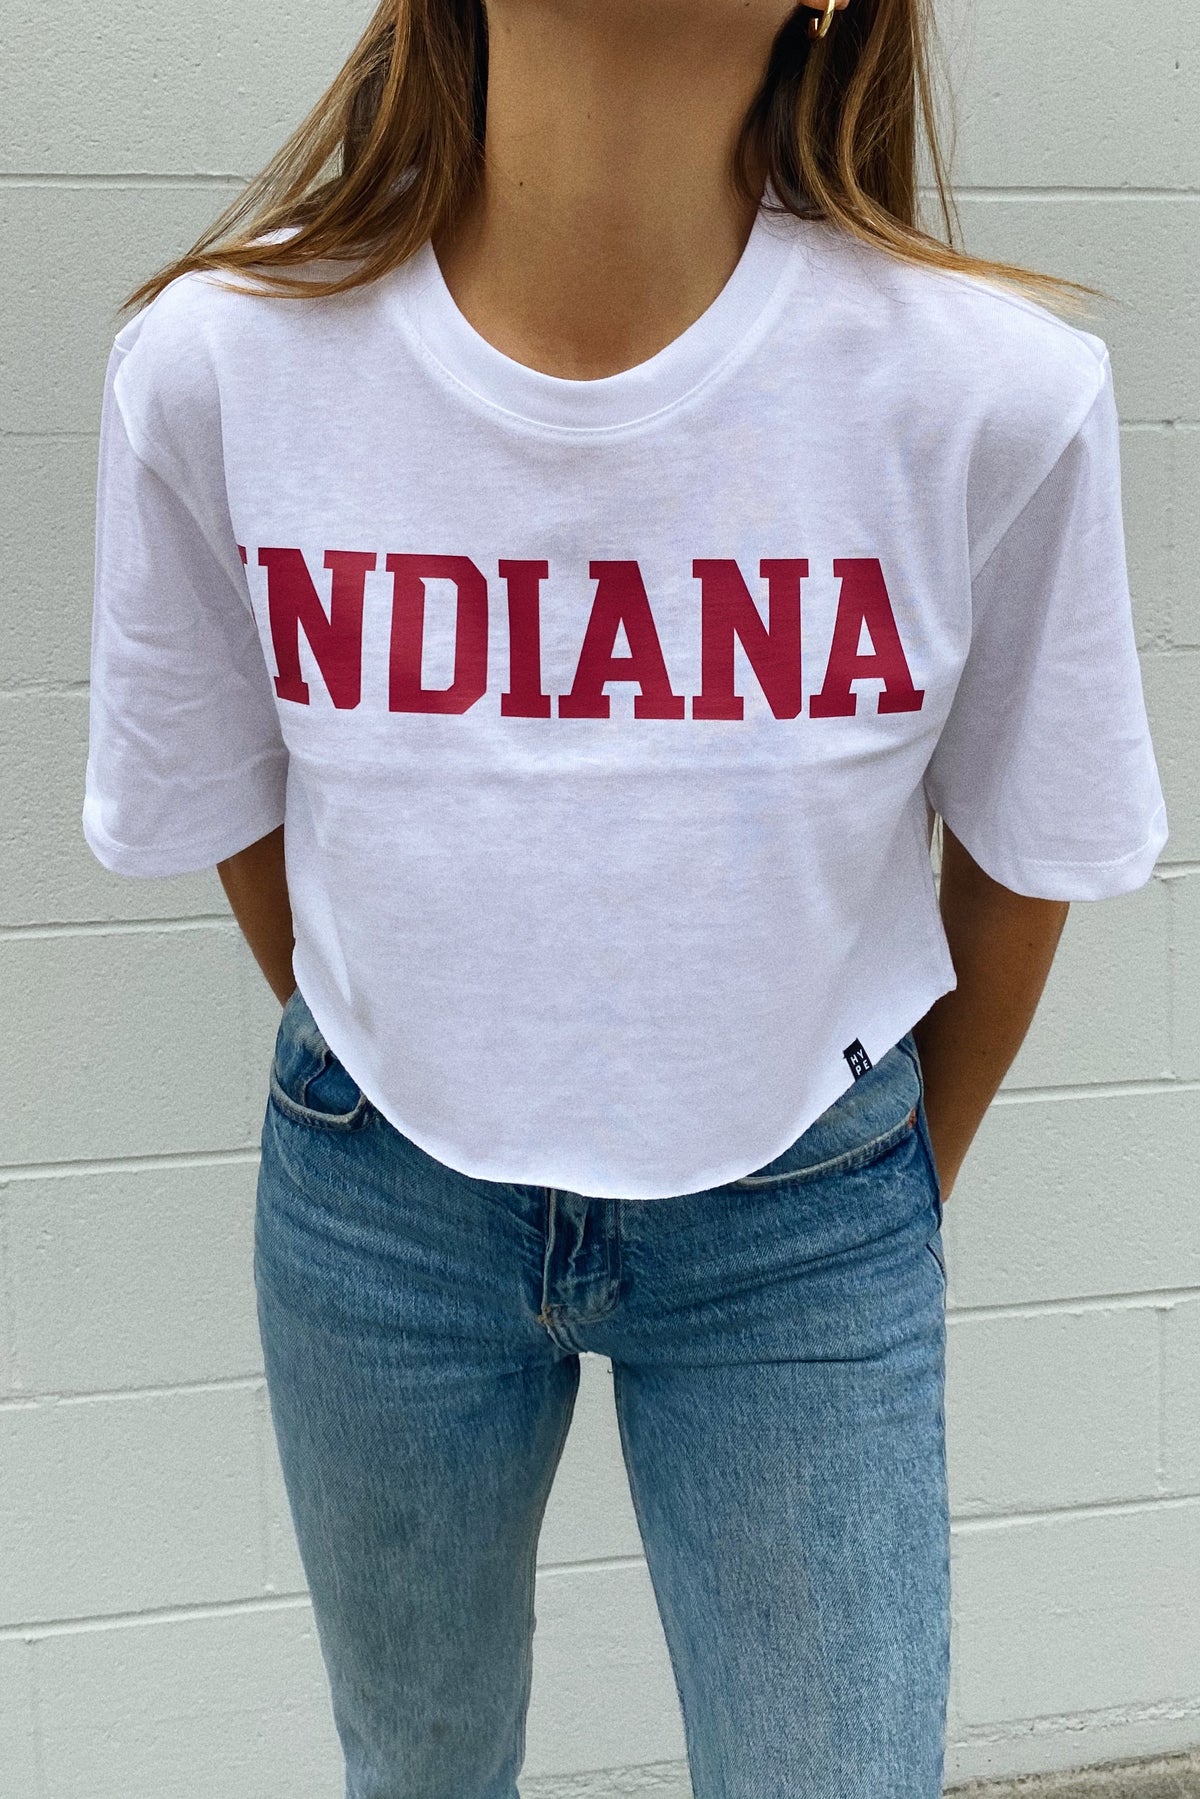 Indiana Touchdown Tee